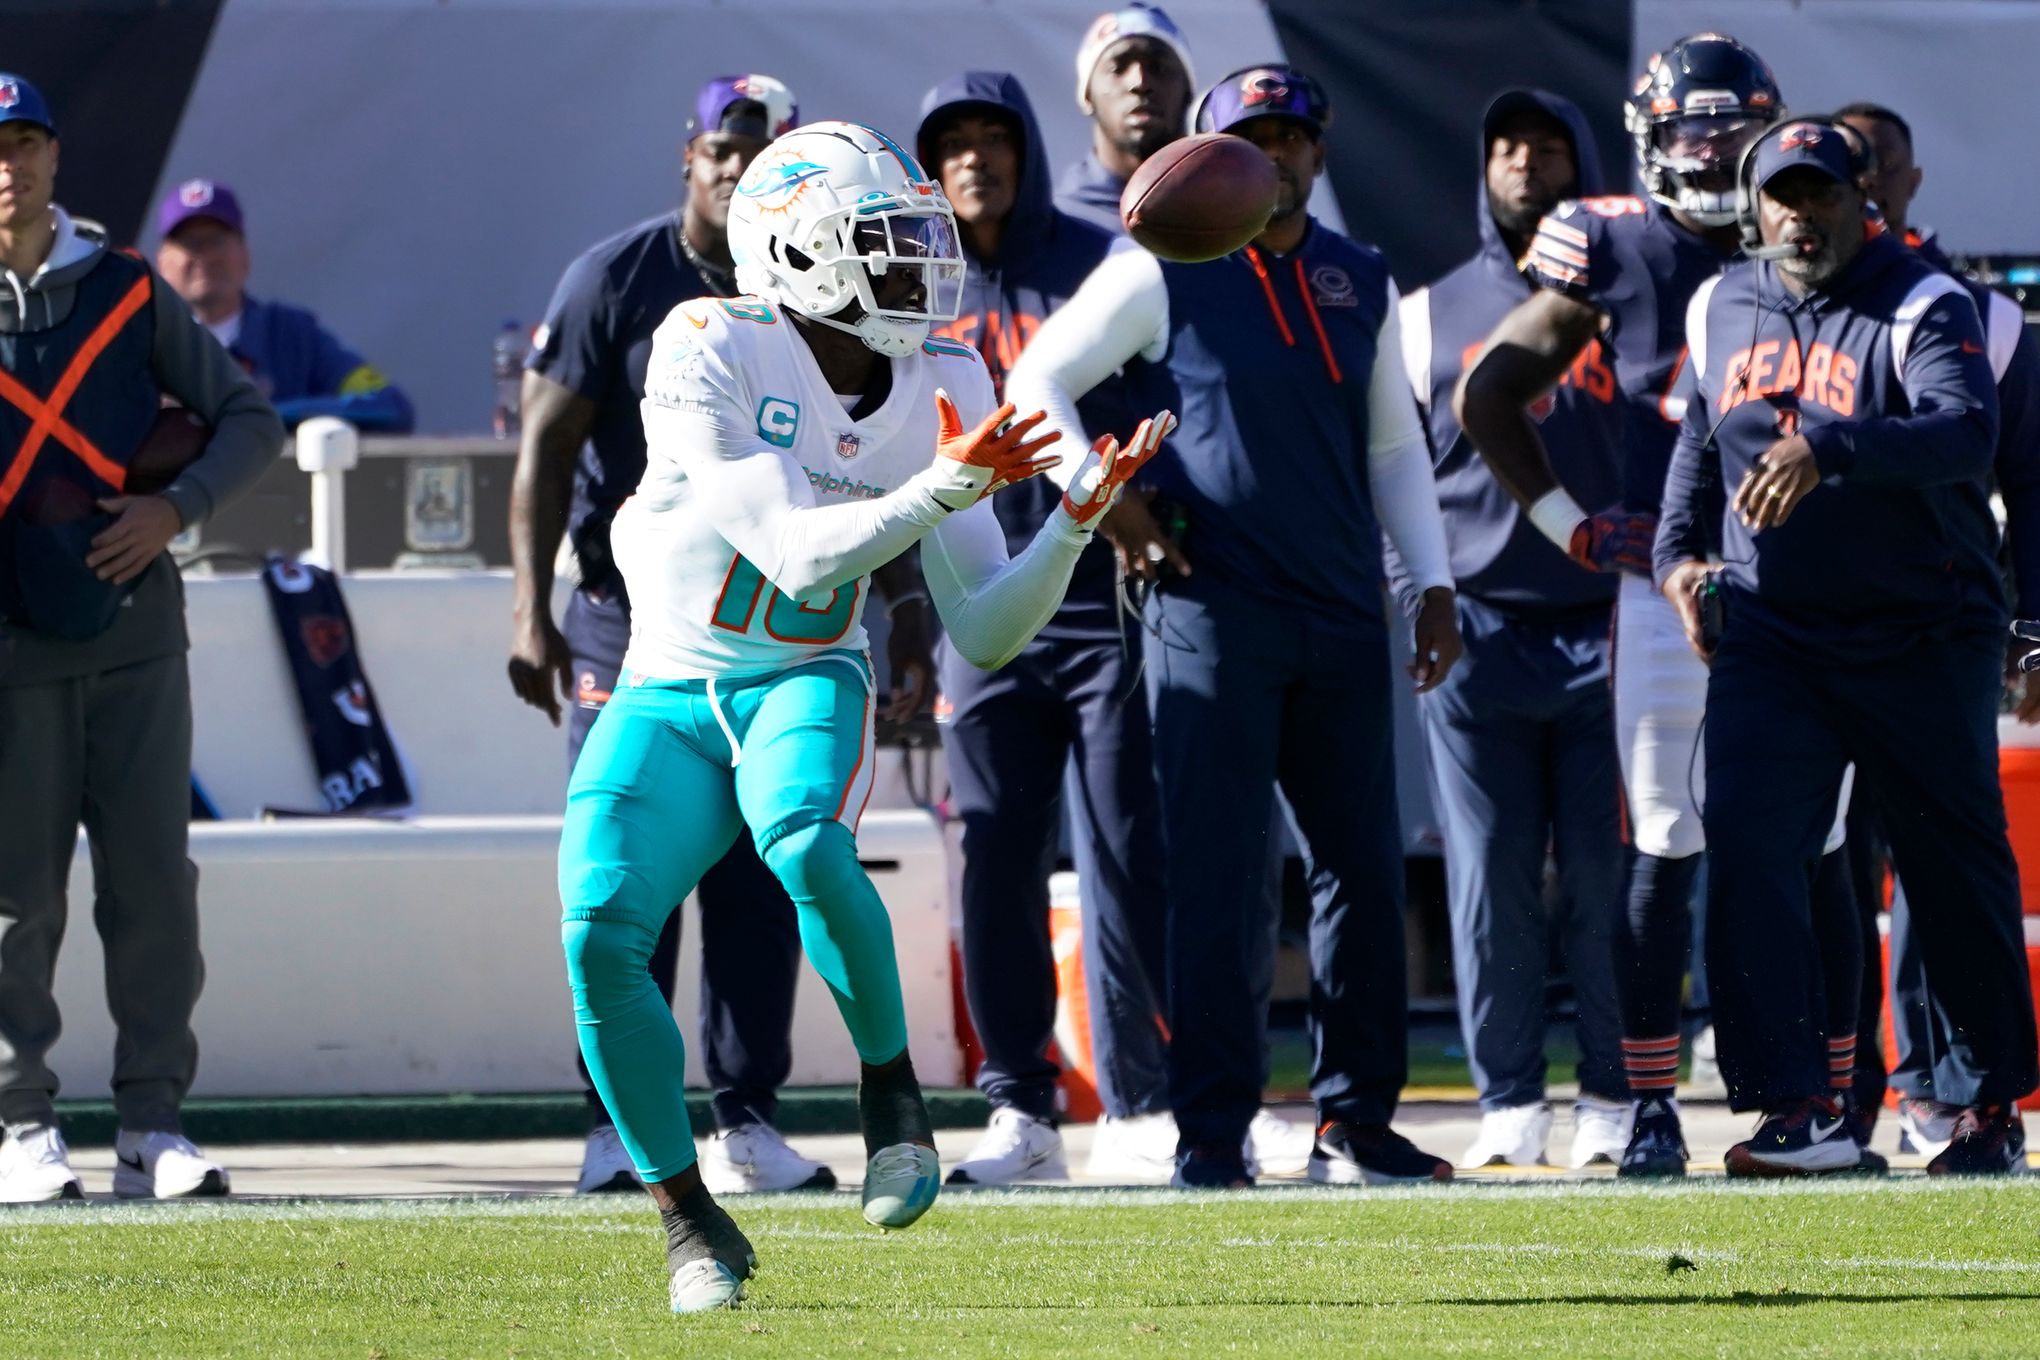 Tyreek Hill, Dolphins success shows value of elite WRs